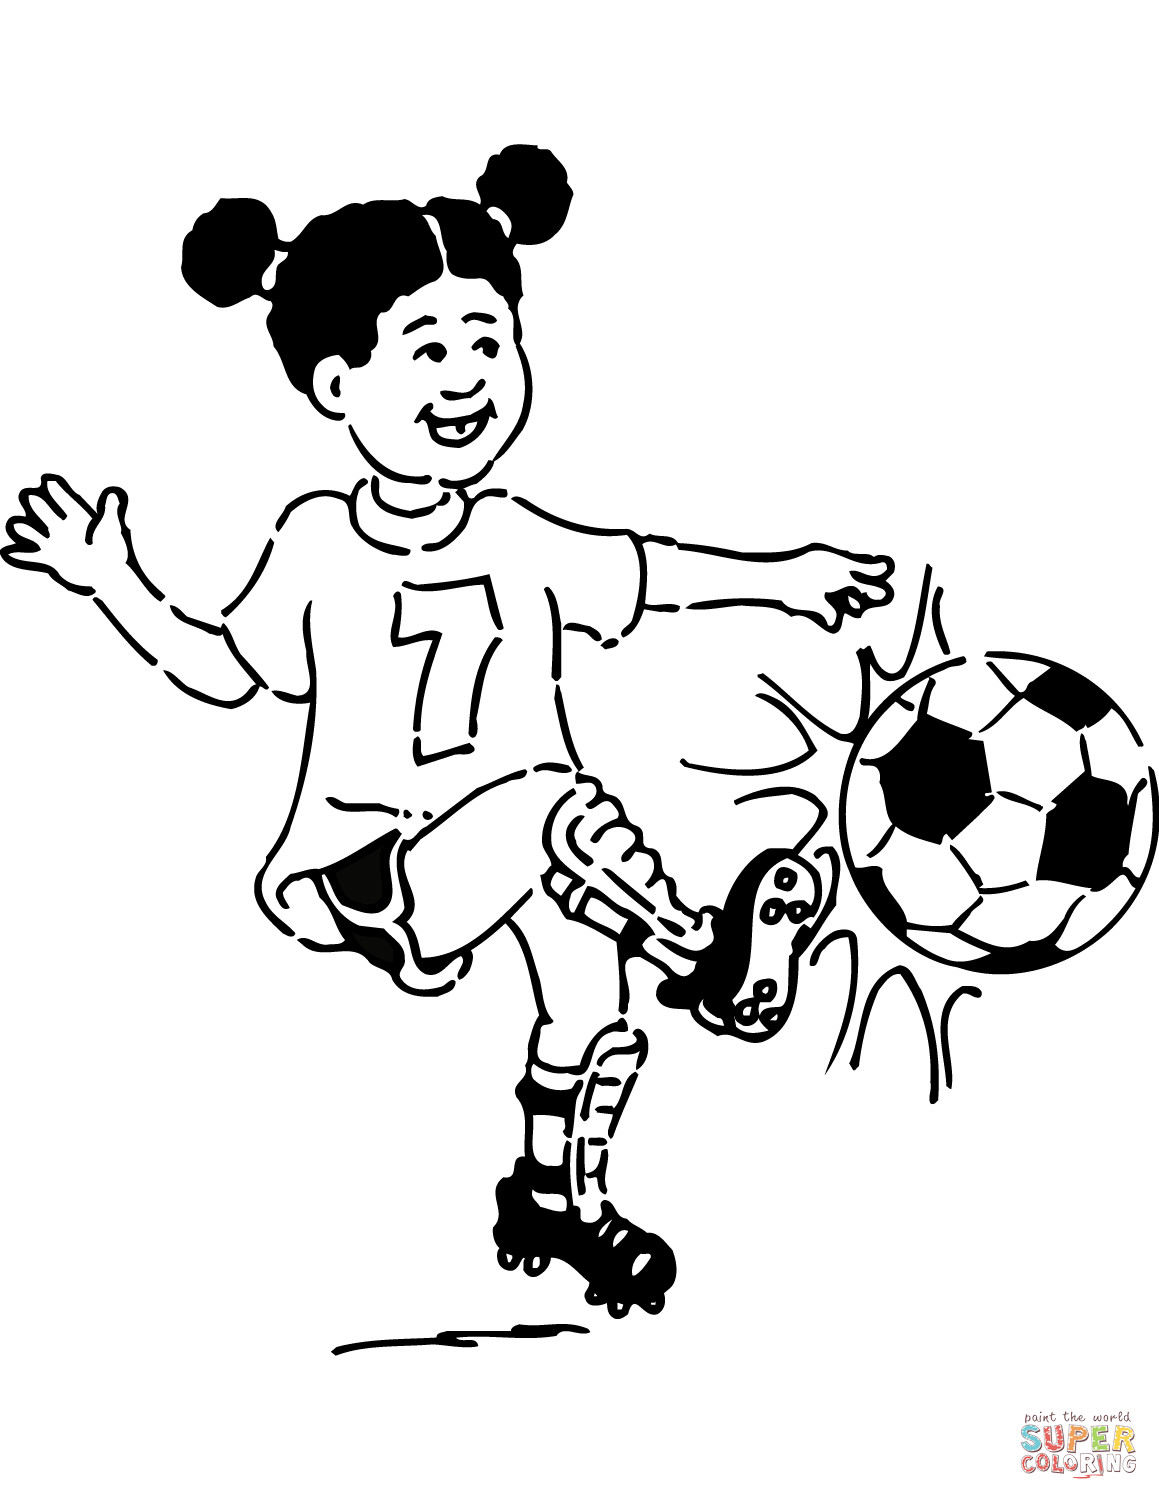 Girl Soccer Player Coloring Pages
 Girl Plays Football coloring page